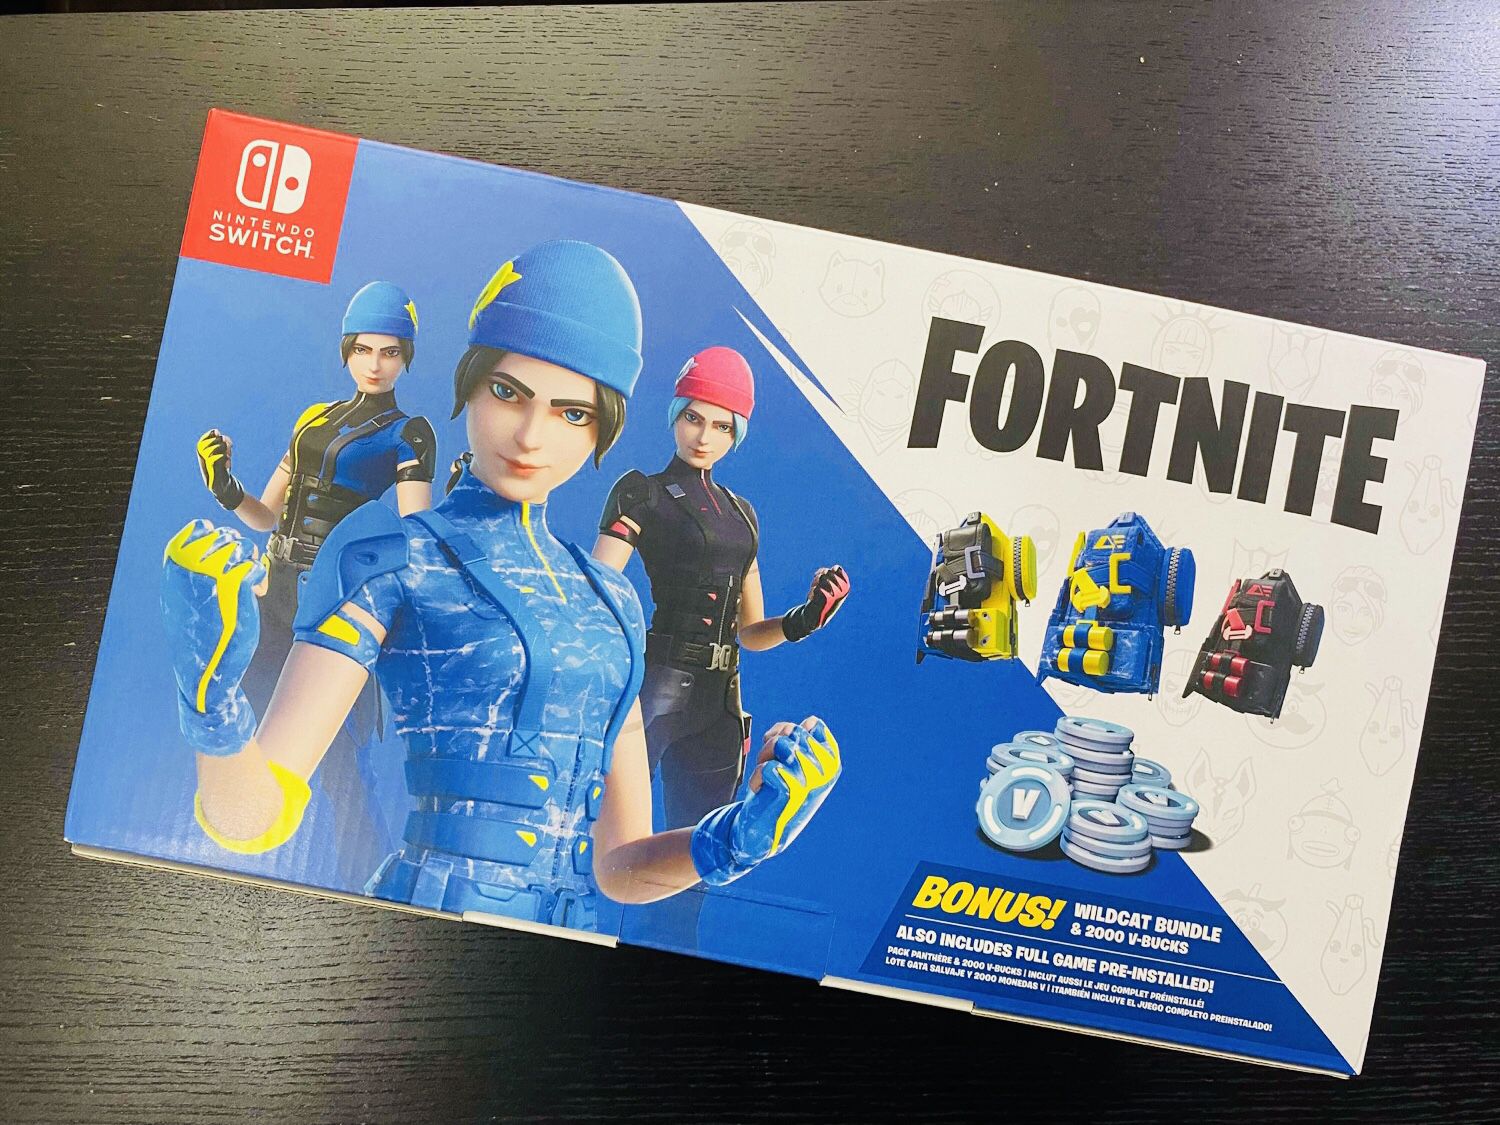 Limited edition Fornite Nintendo Switch Wildcat Bundle